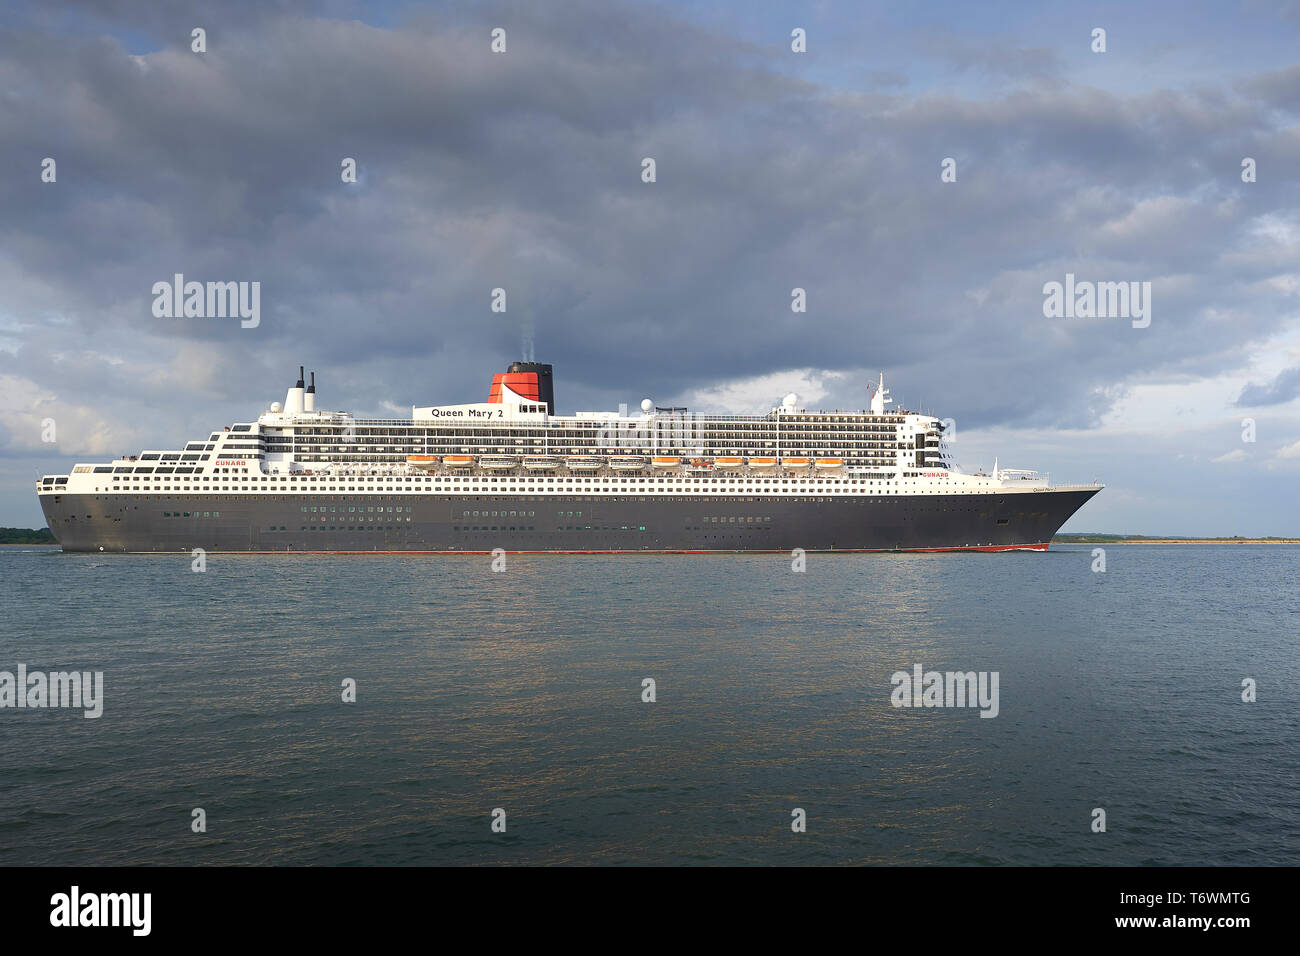 The Cunard Line, Transatlantic Ocean Liner, RMS QUEEN MARY 2, Underway From The Port Of Southampton, UK. Bound For New York, 28 April 2019. Stock Photo